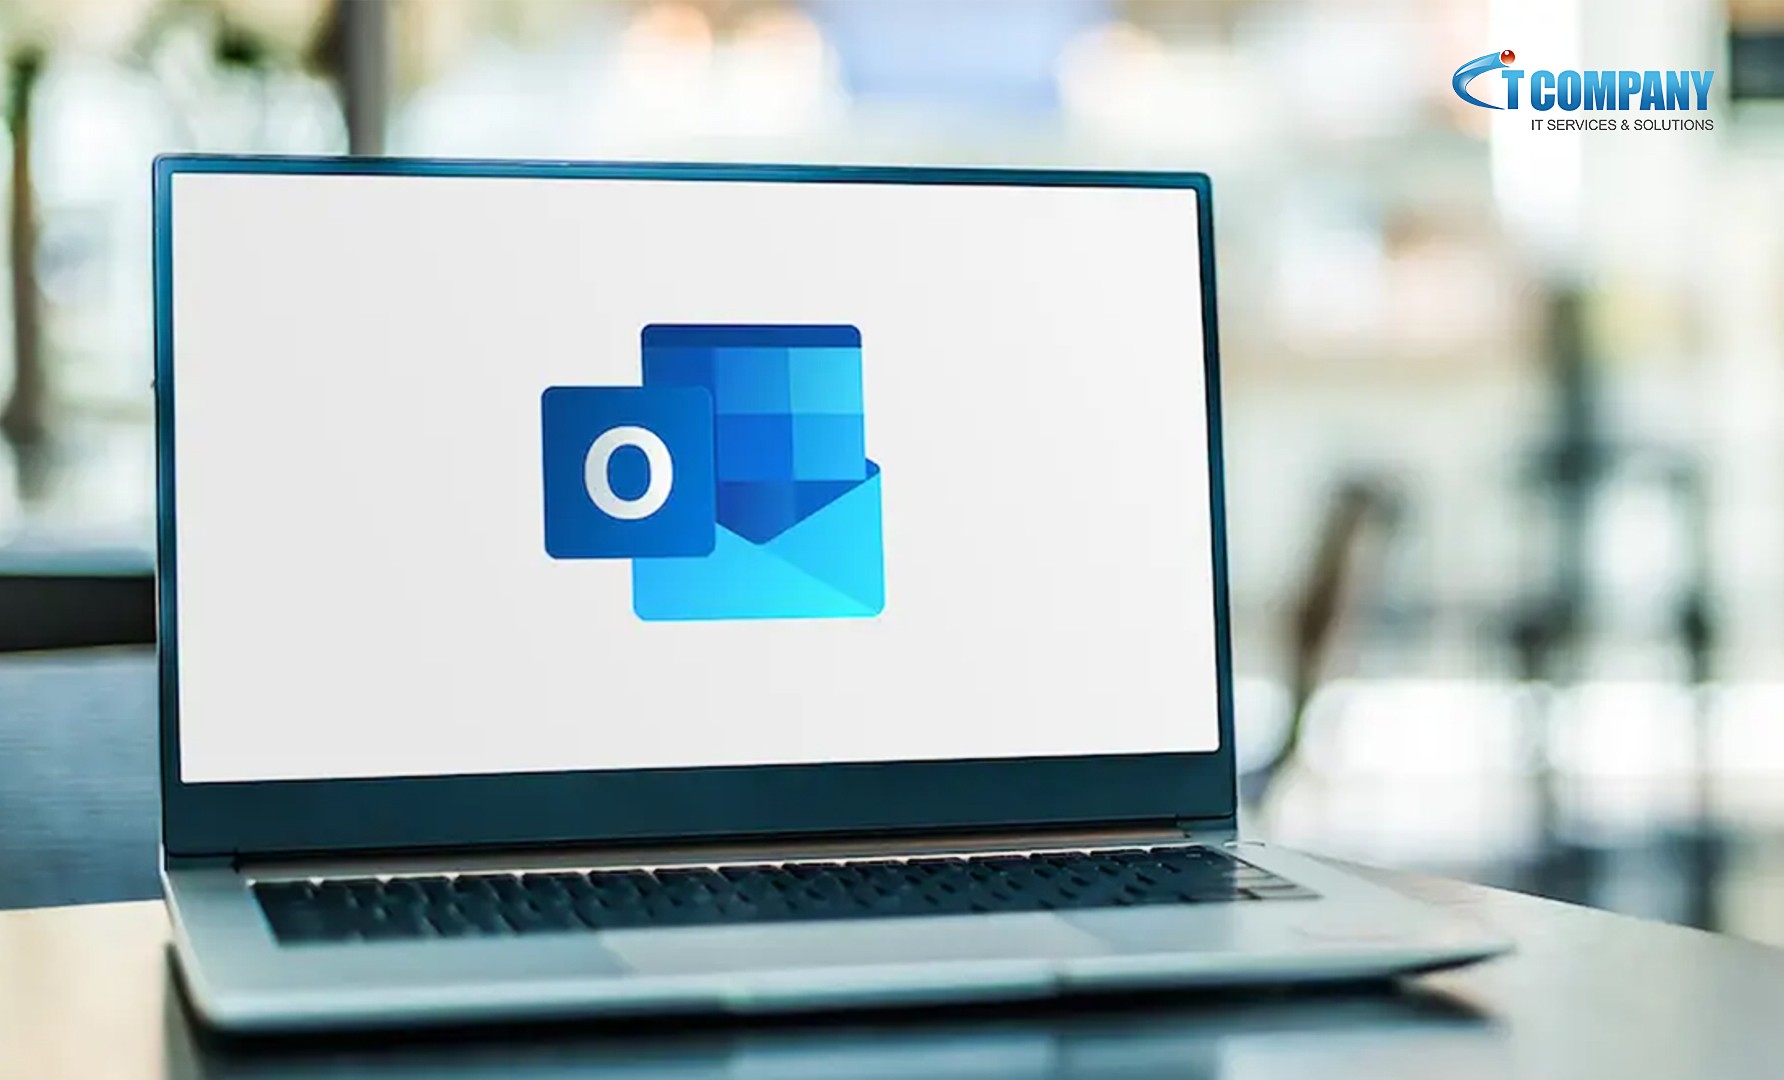 Microsoft Outlook’s update can solve a problem that shouldn’t even exist  